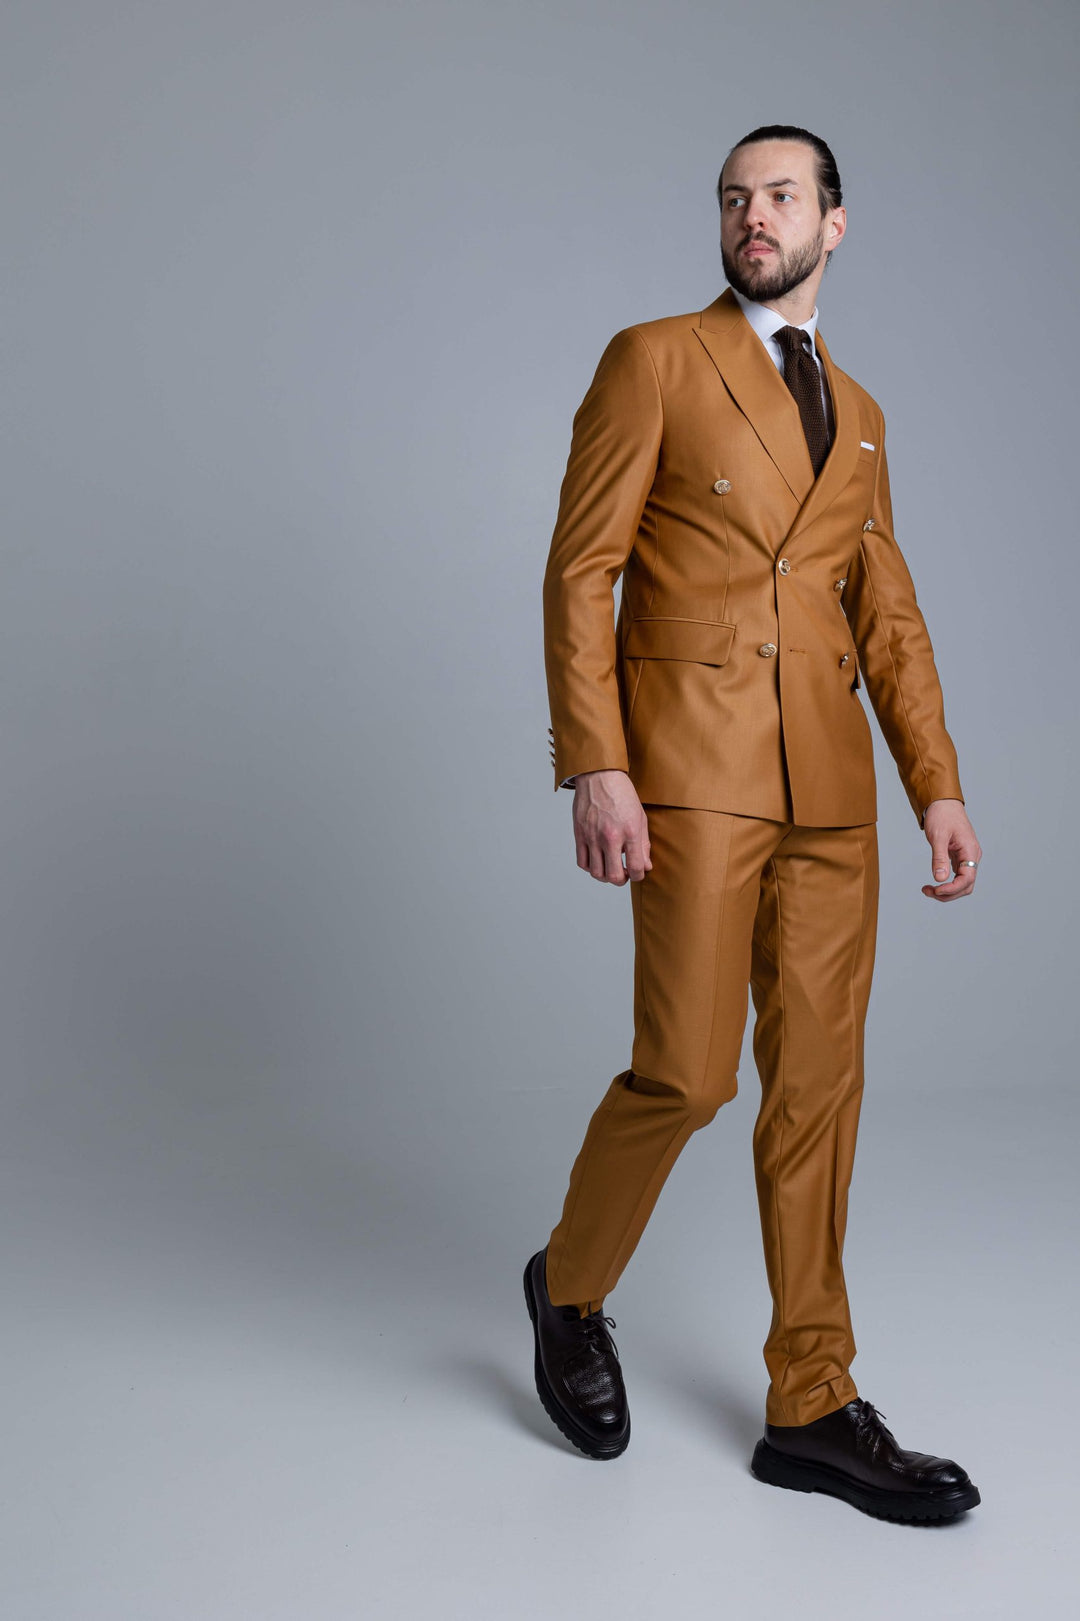 Light brown two-piece suit with double-breasted jacket